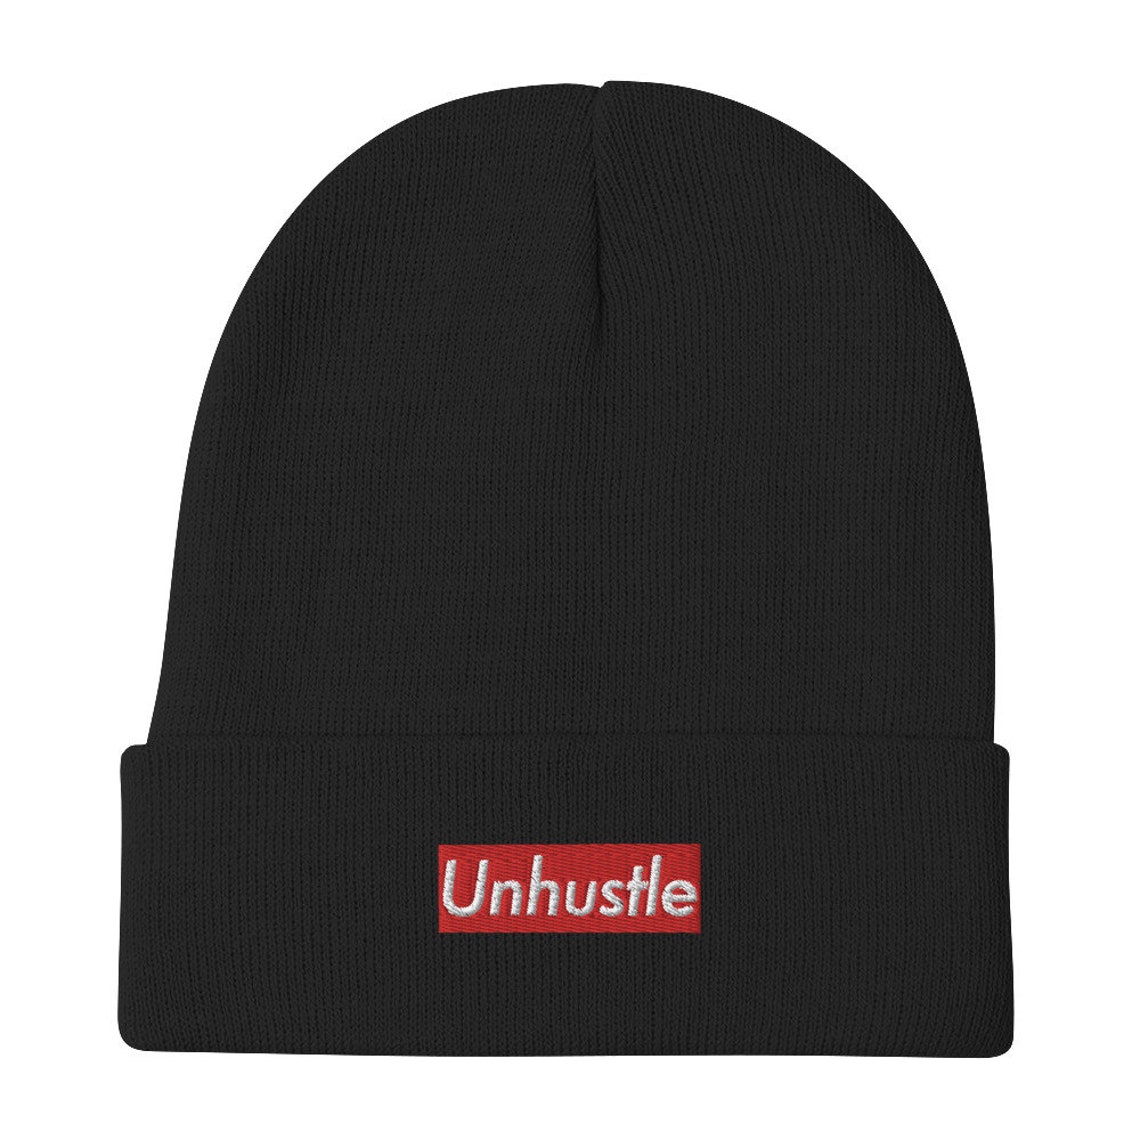 Unhustle Embroidered Beanie Streetwear Beanie Rollup Knit - Etsy